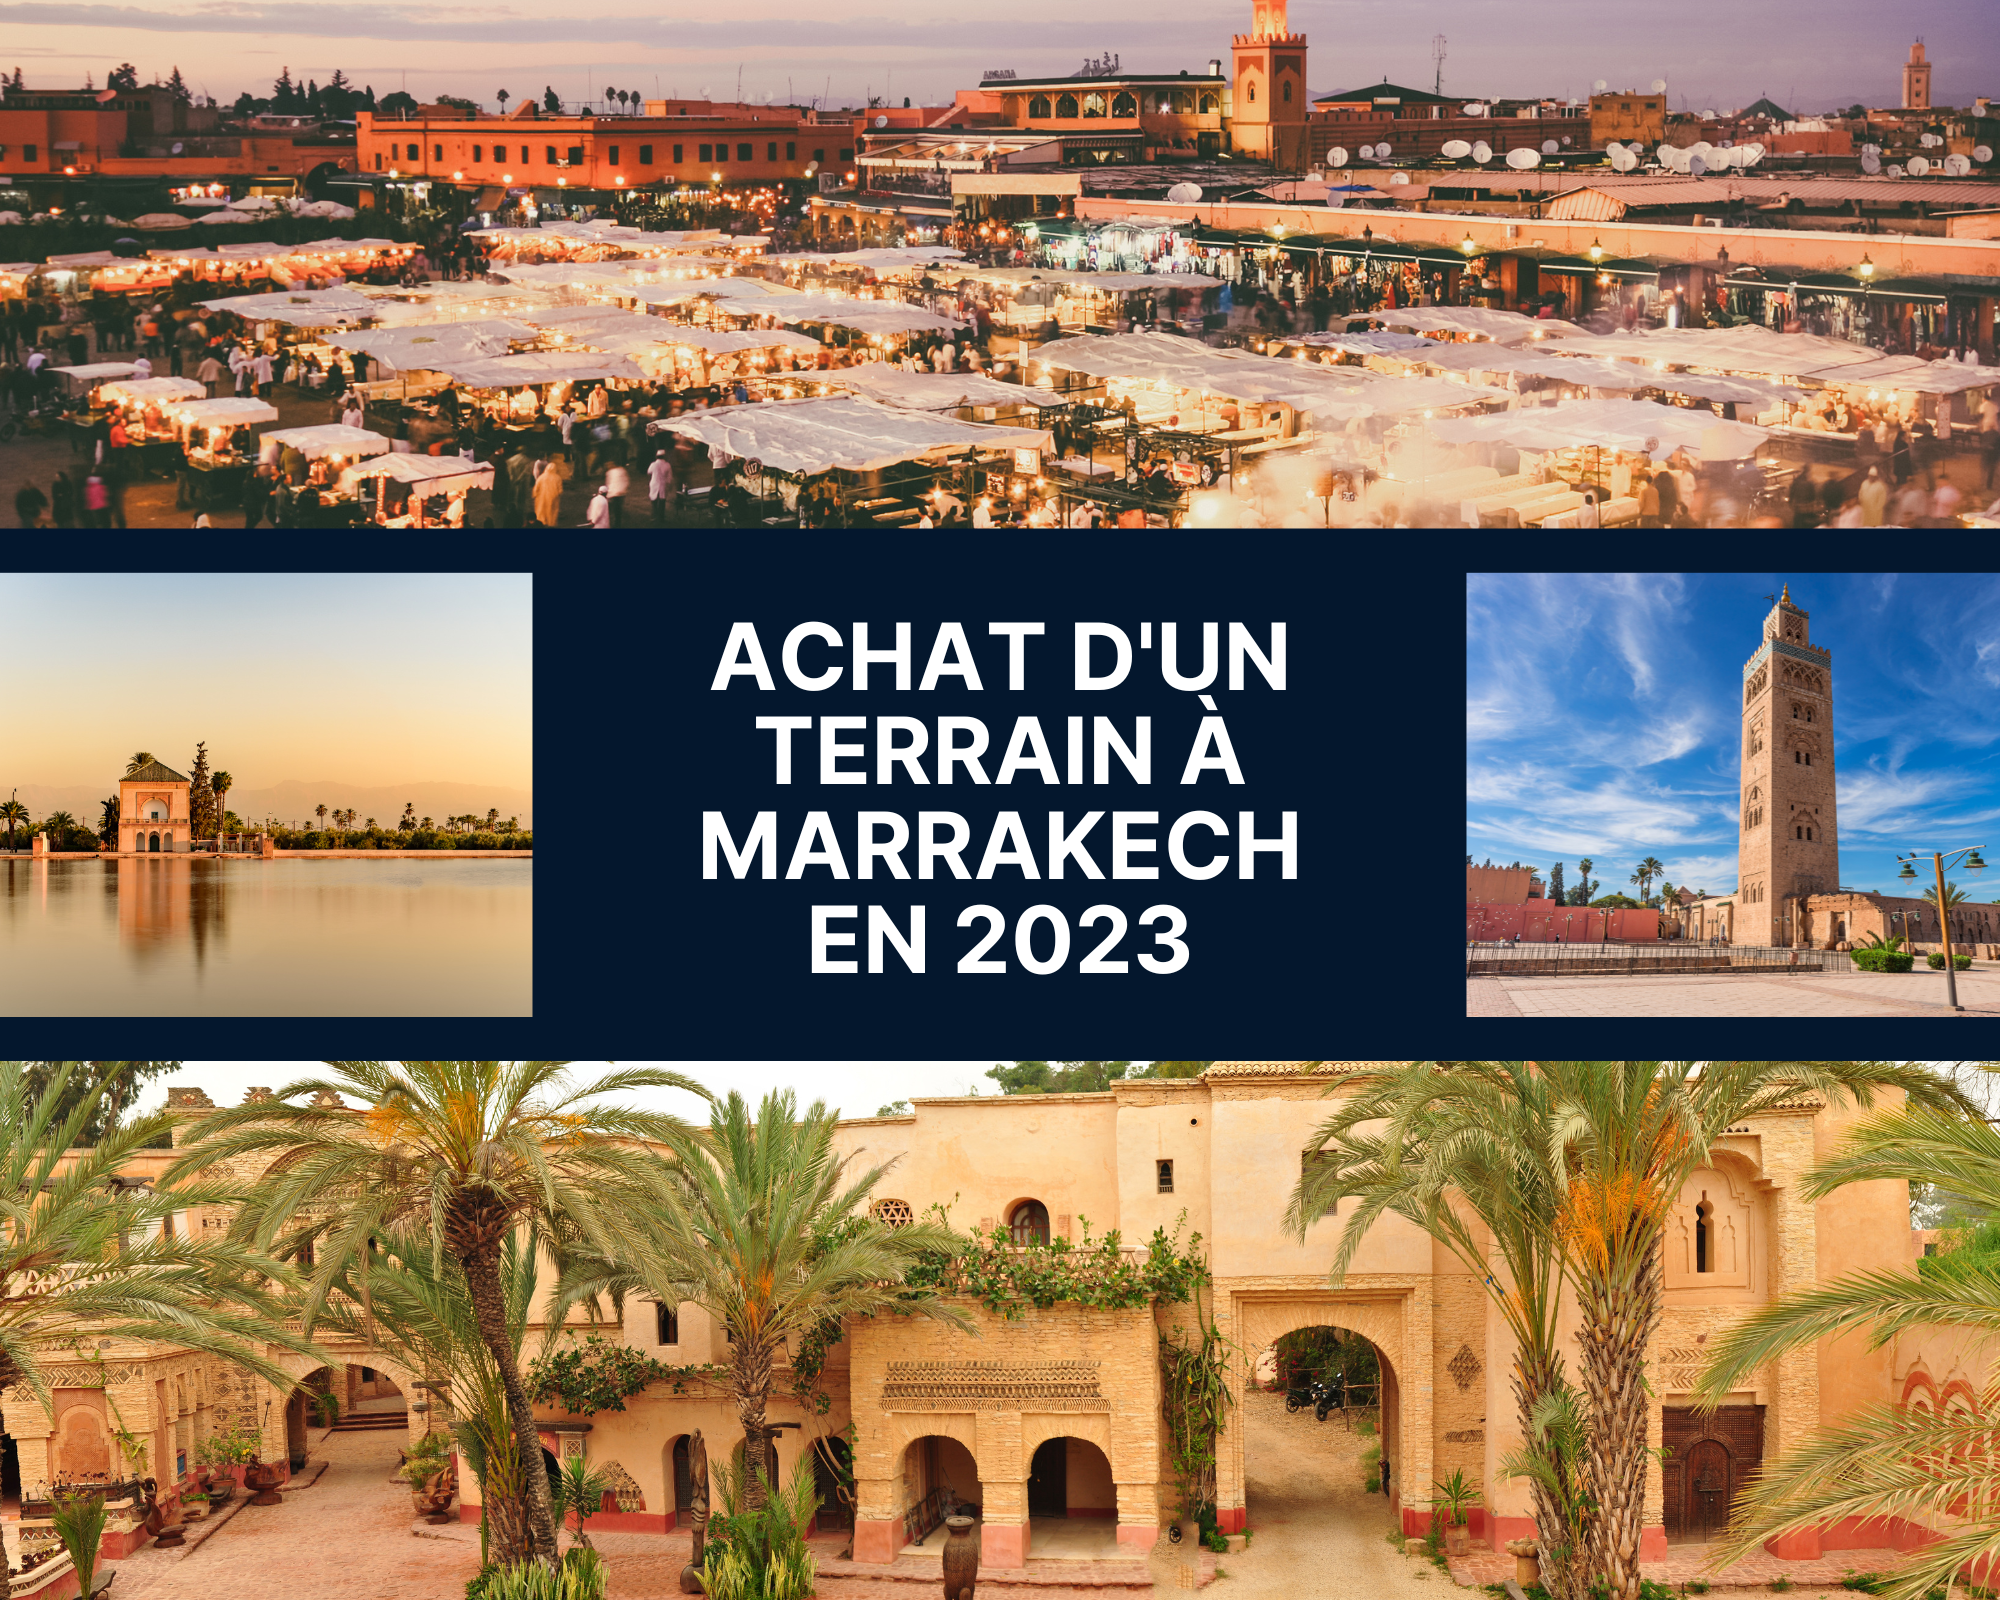 buying land in marrakech in 2023